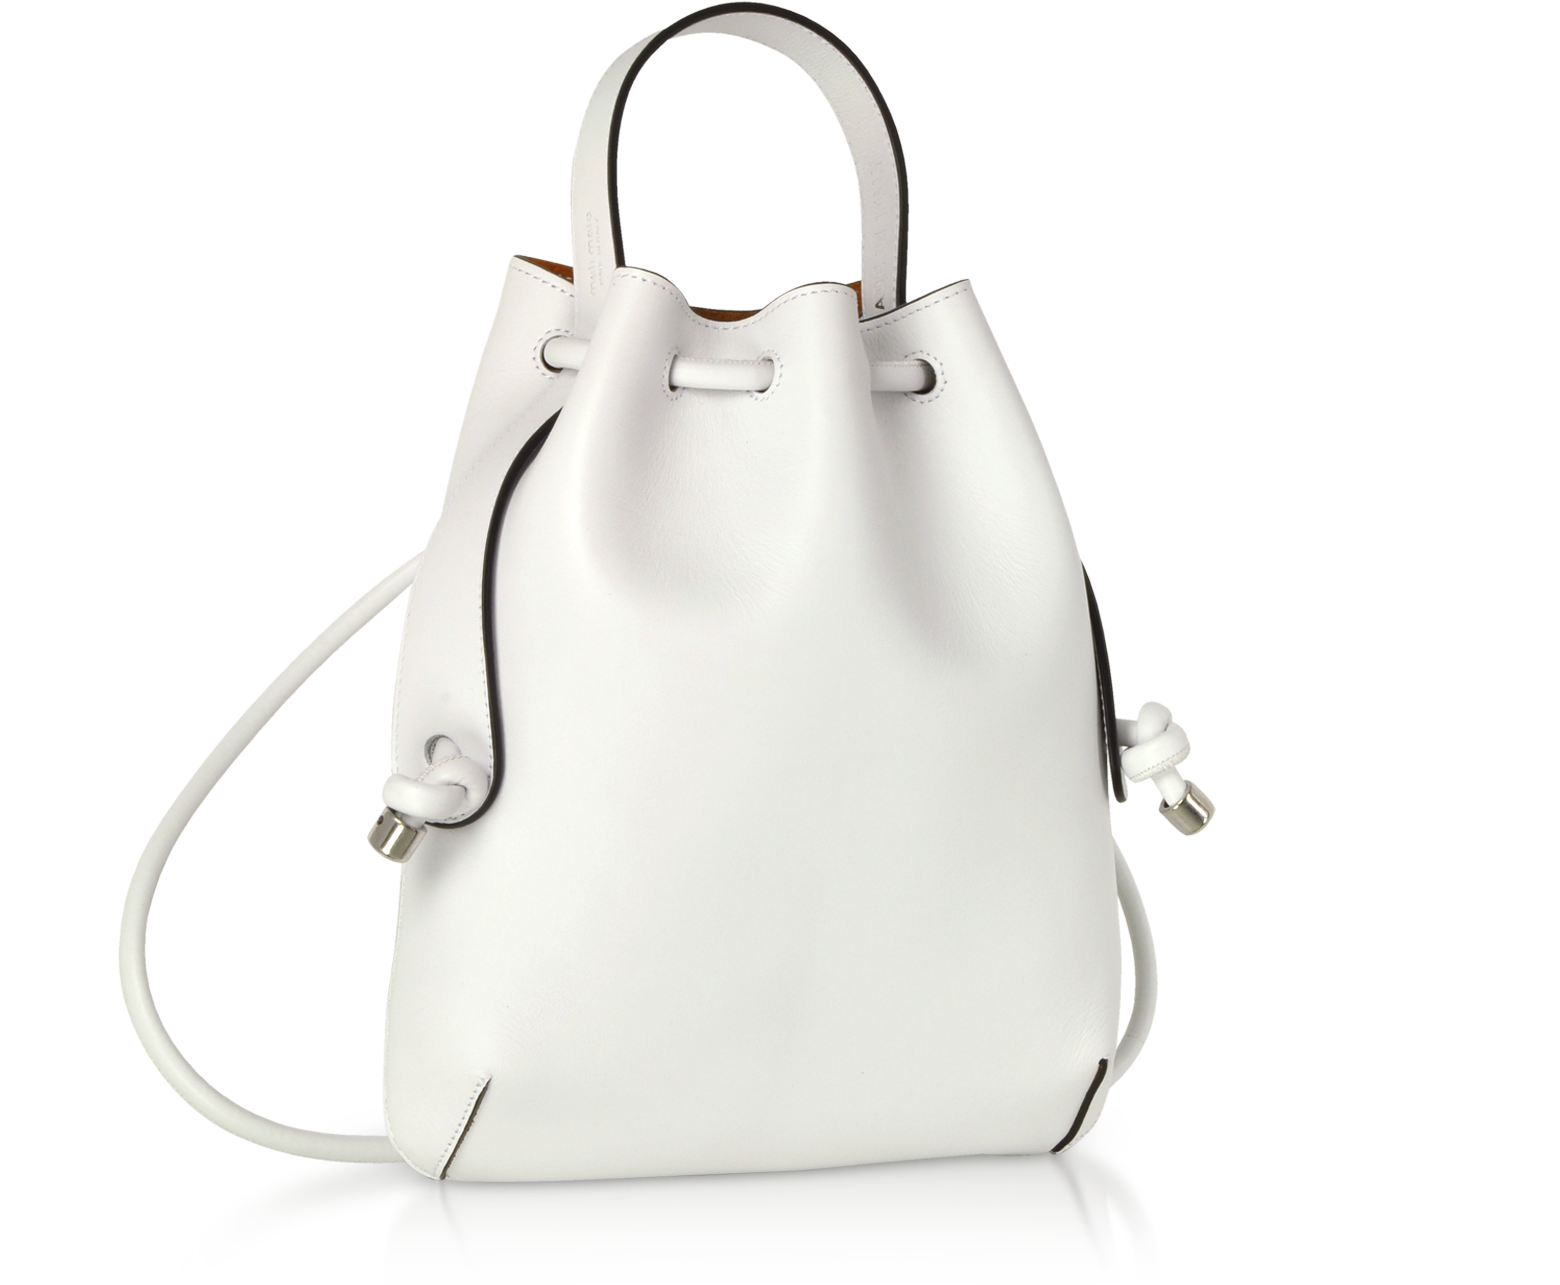 Meli-Melo Briony Mini Backpack crafted in nappa leather balances